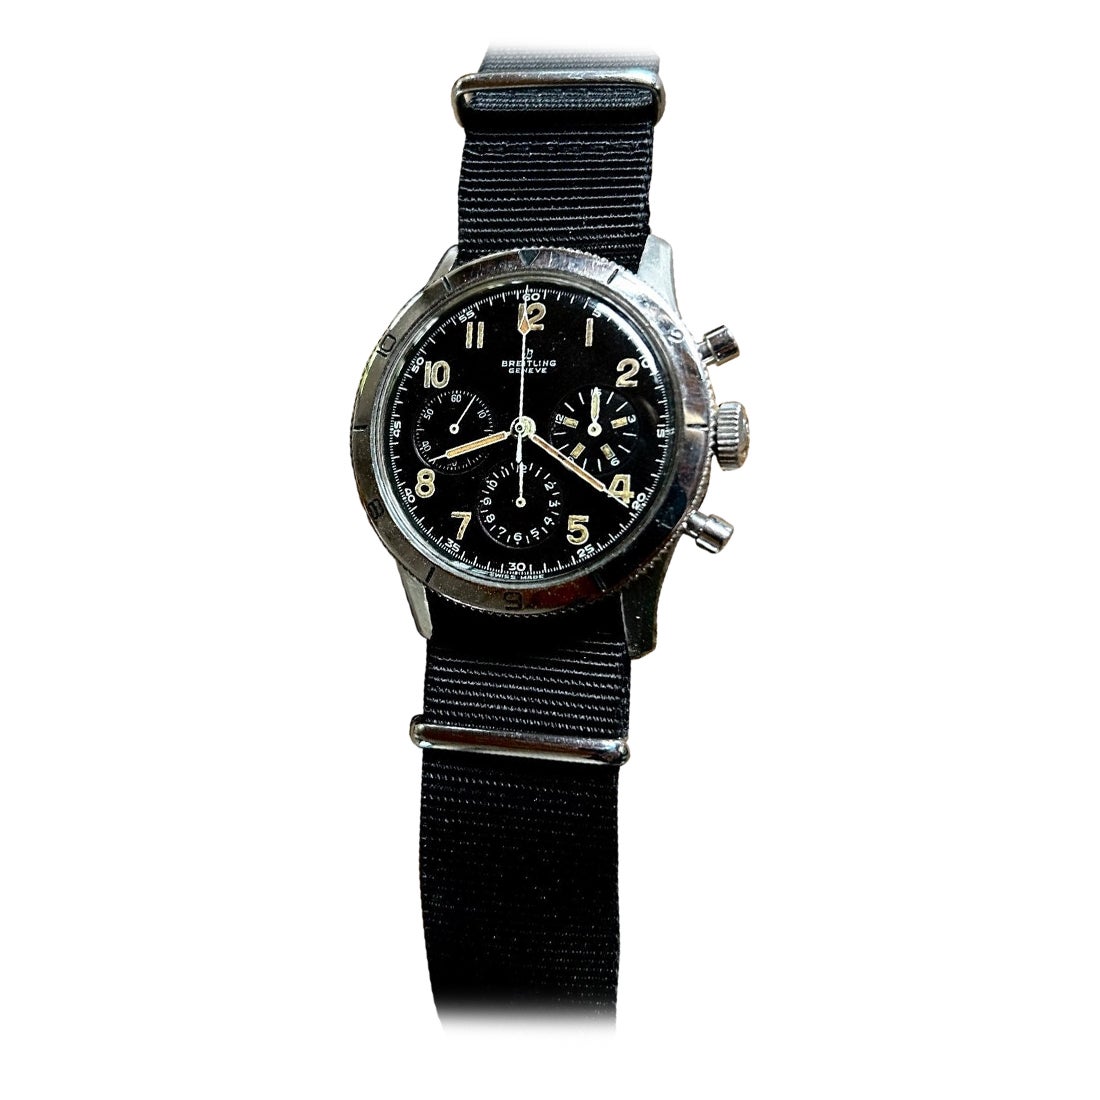 Breitling watch - Avi Co-pilot 765 from 1960 For Sale